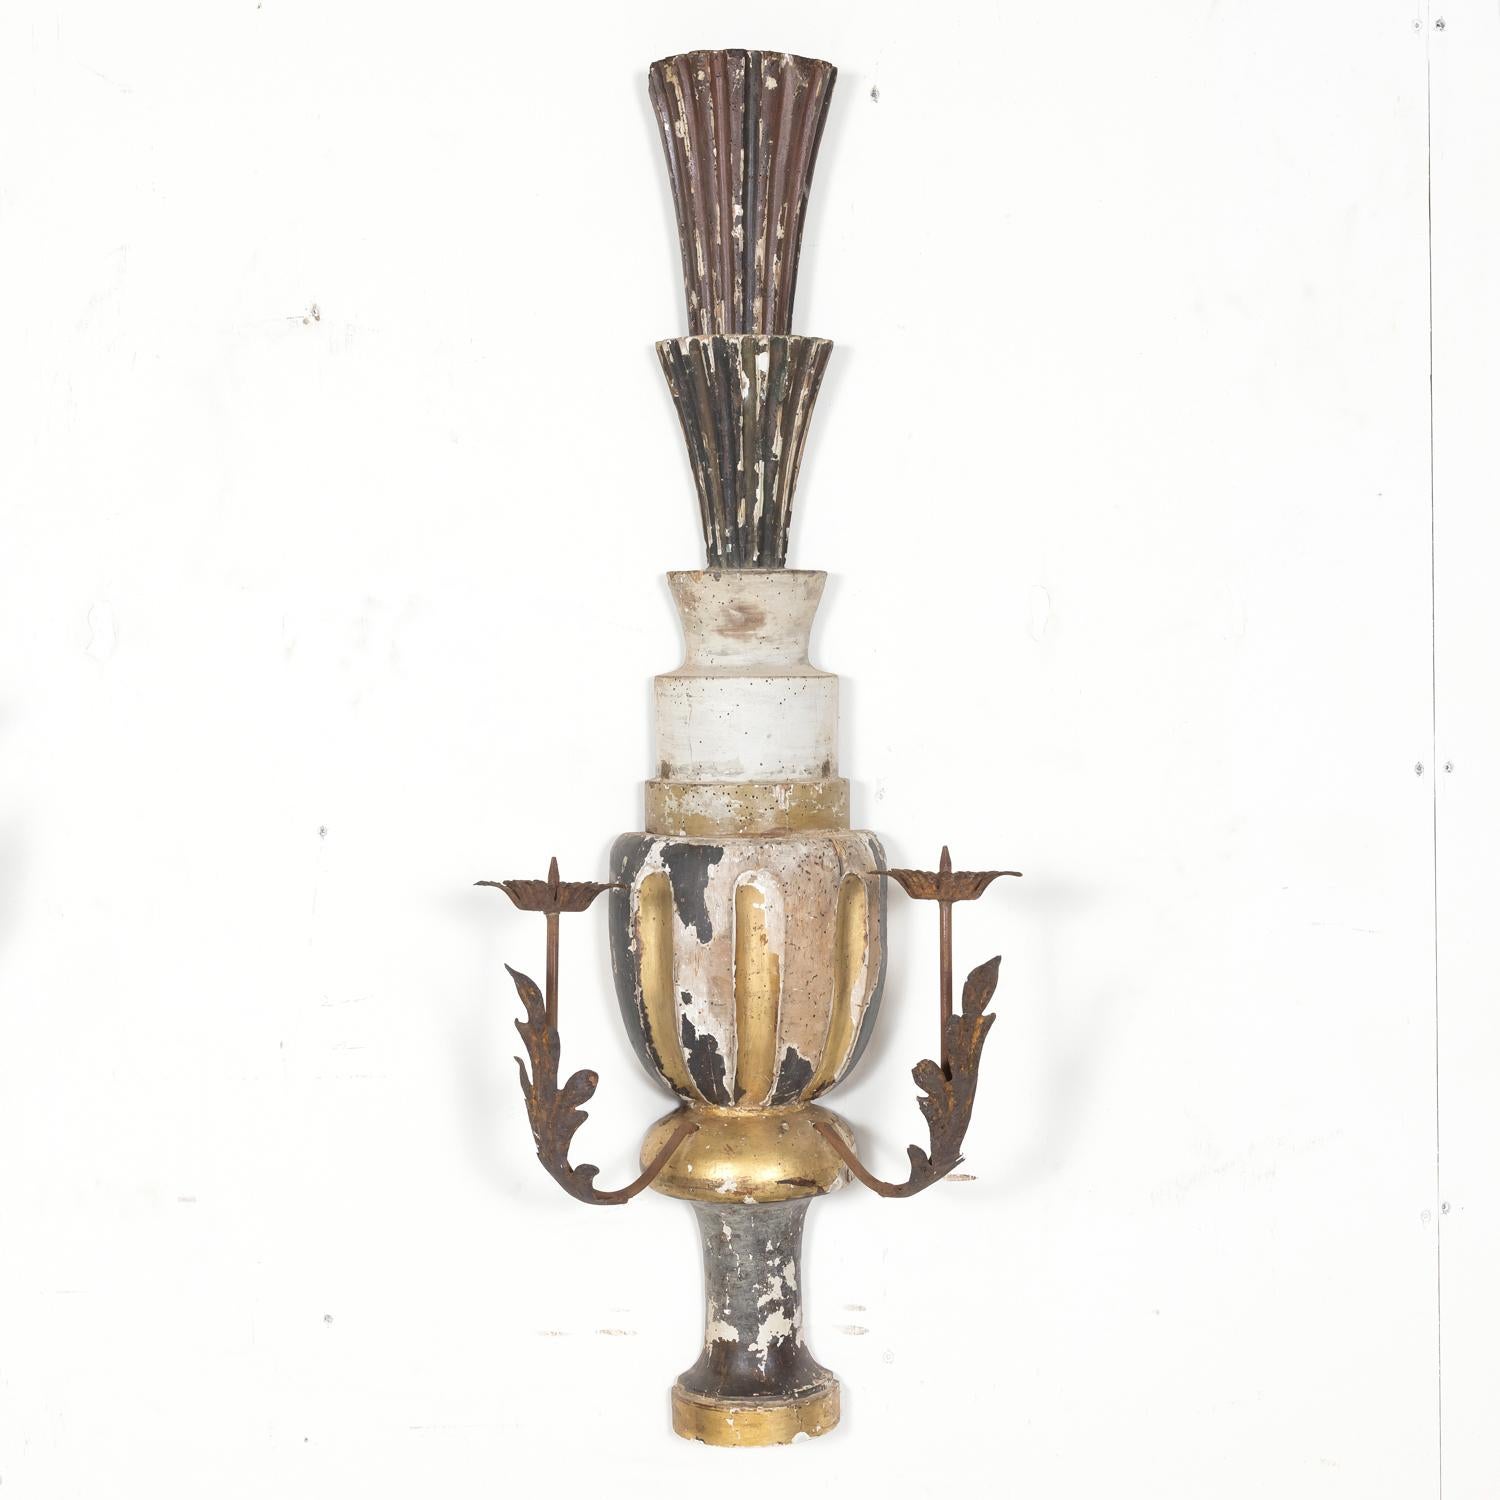 A large pair of 19th century hand carved wooden Italian candle sconces handcrafted in Florence, circa 1890s, having a painted and parcel gilt finish with two large iron arms featuring acanthus leaf motifs. Sconces vary slightly. 
Dimensions:
H -